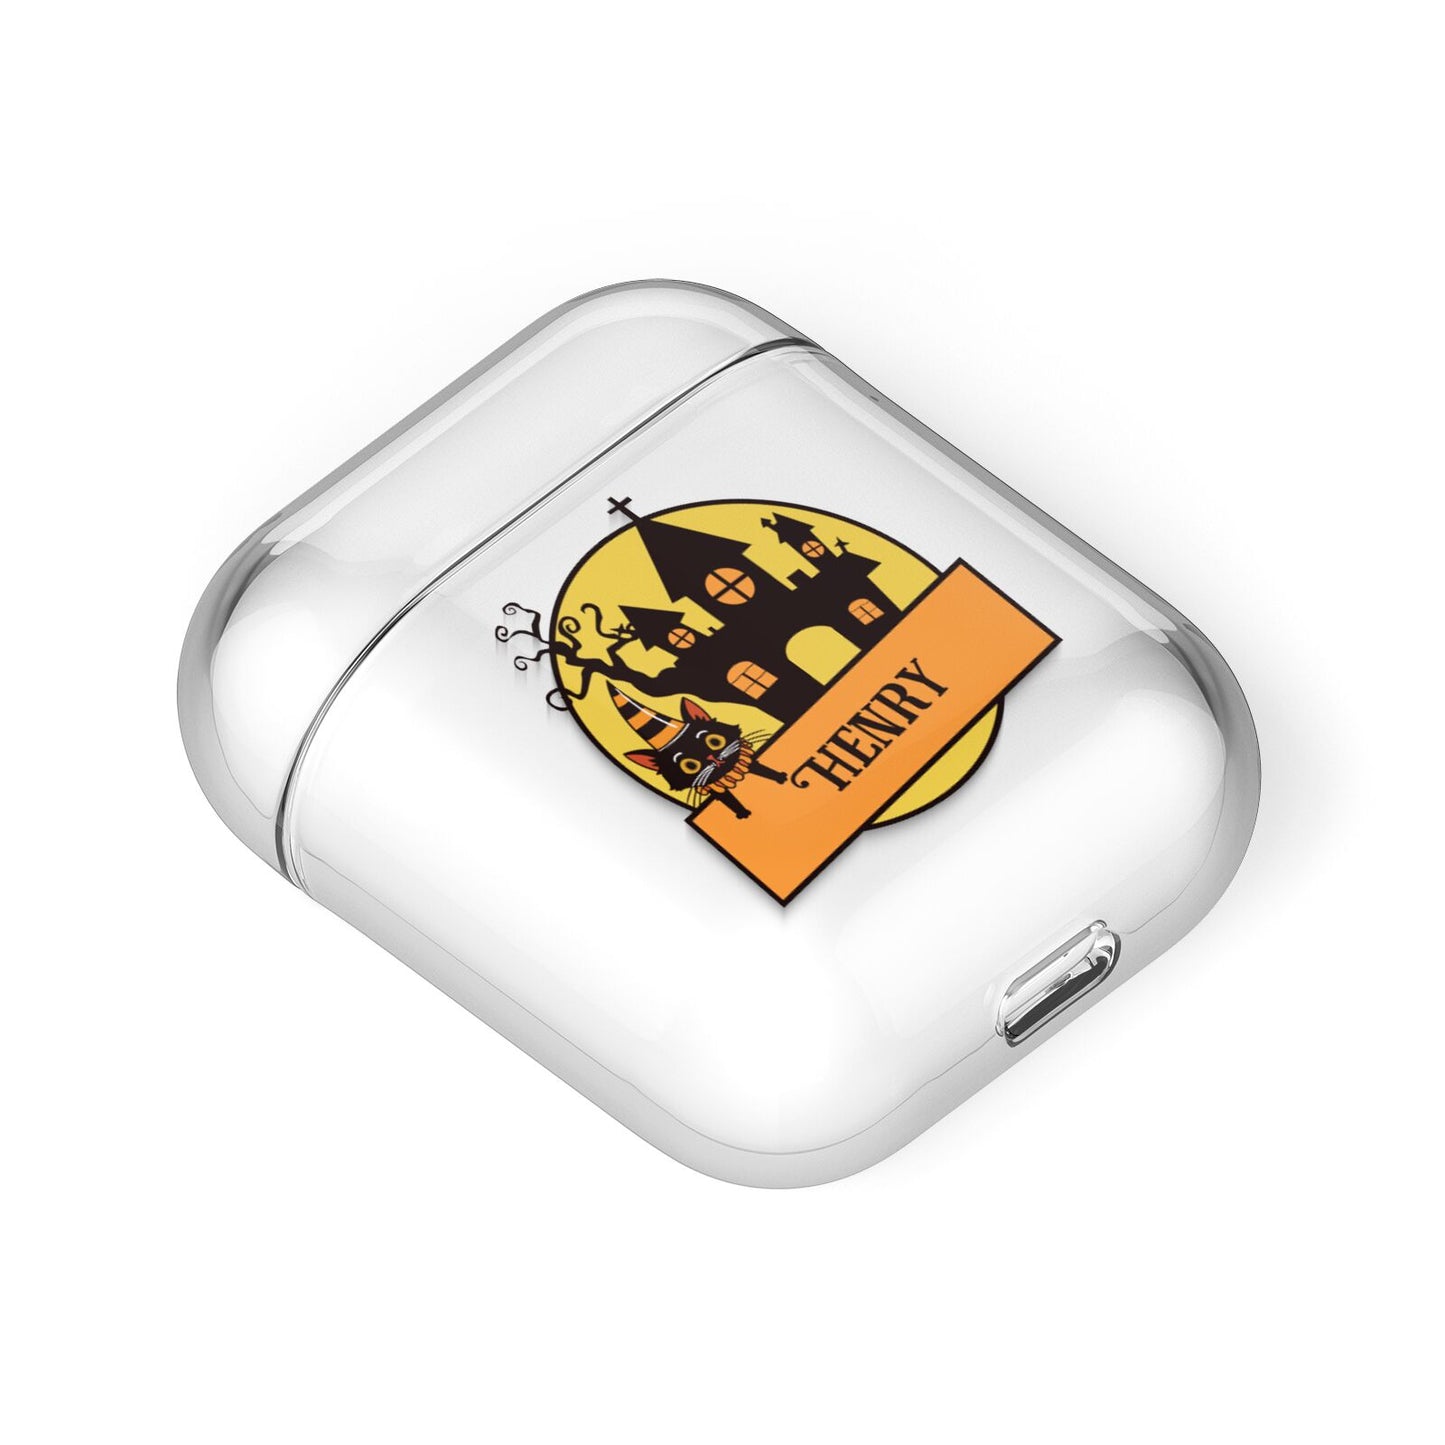 Haunted House Silhouette Custom AirPods Case Laid Flat